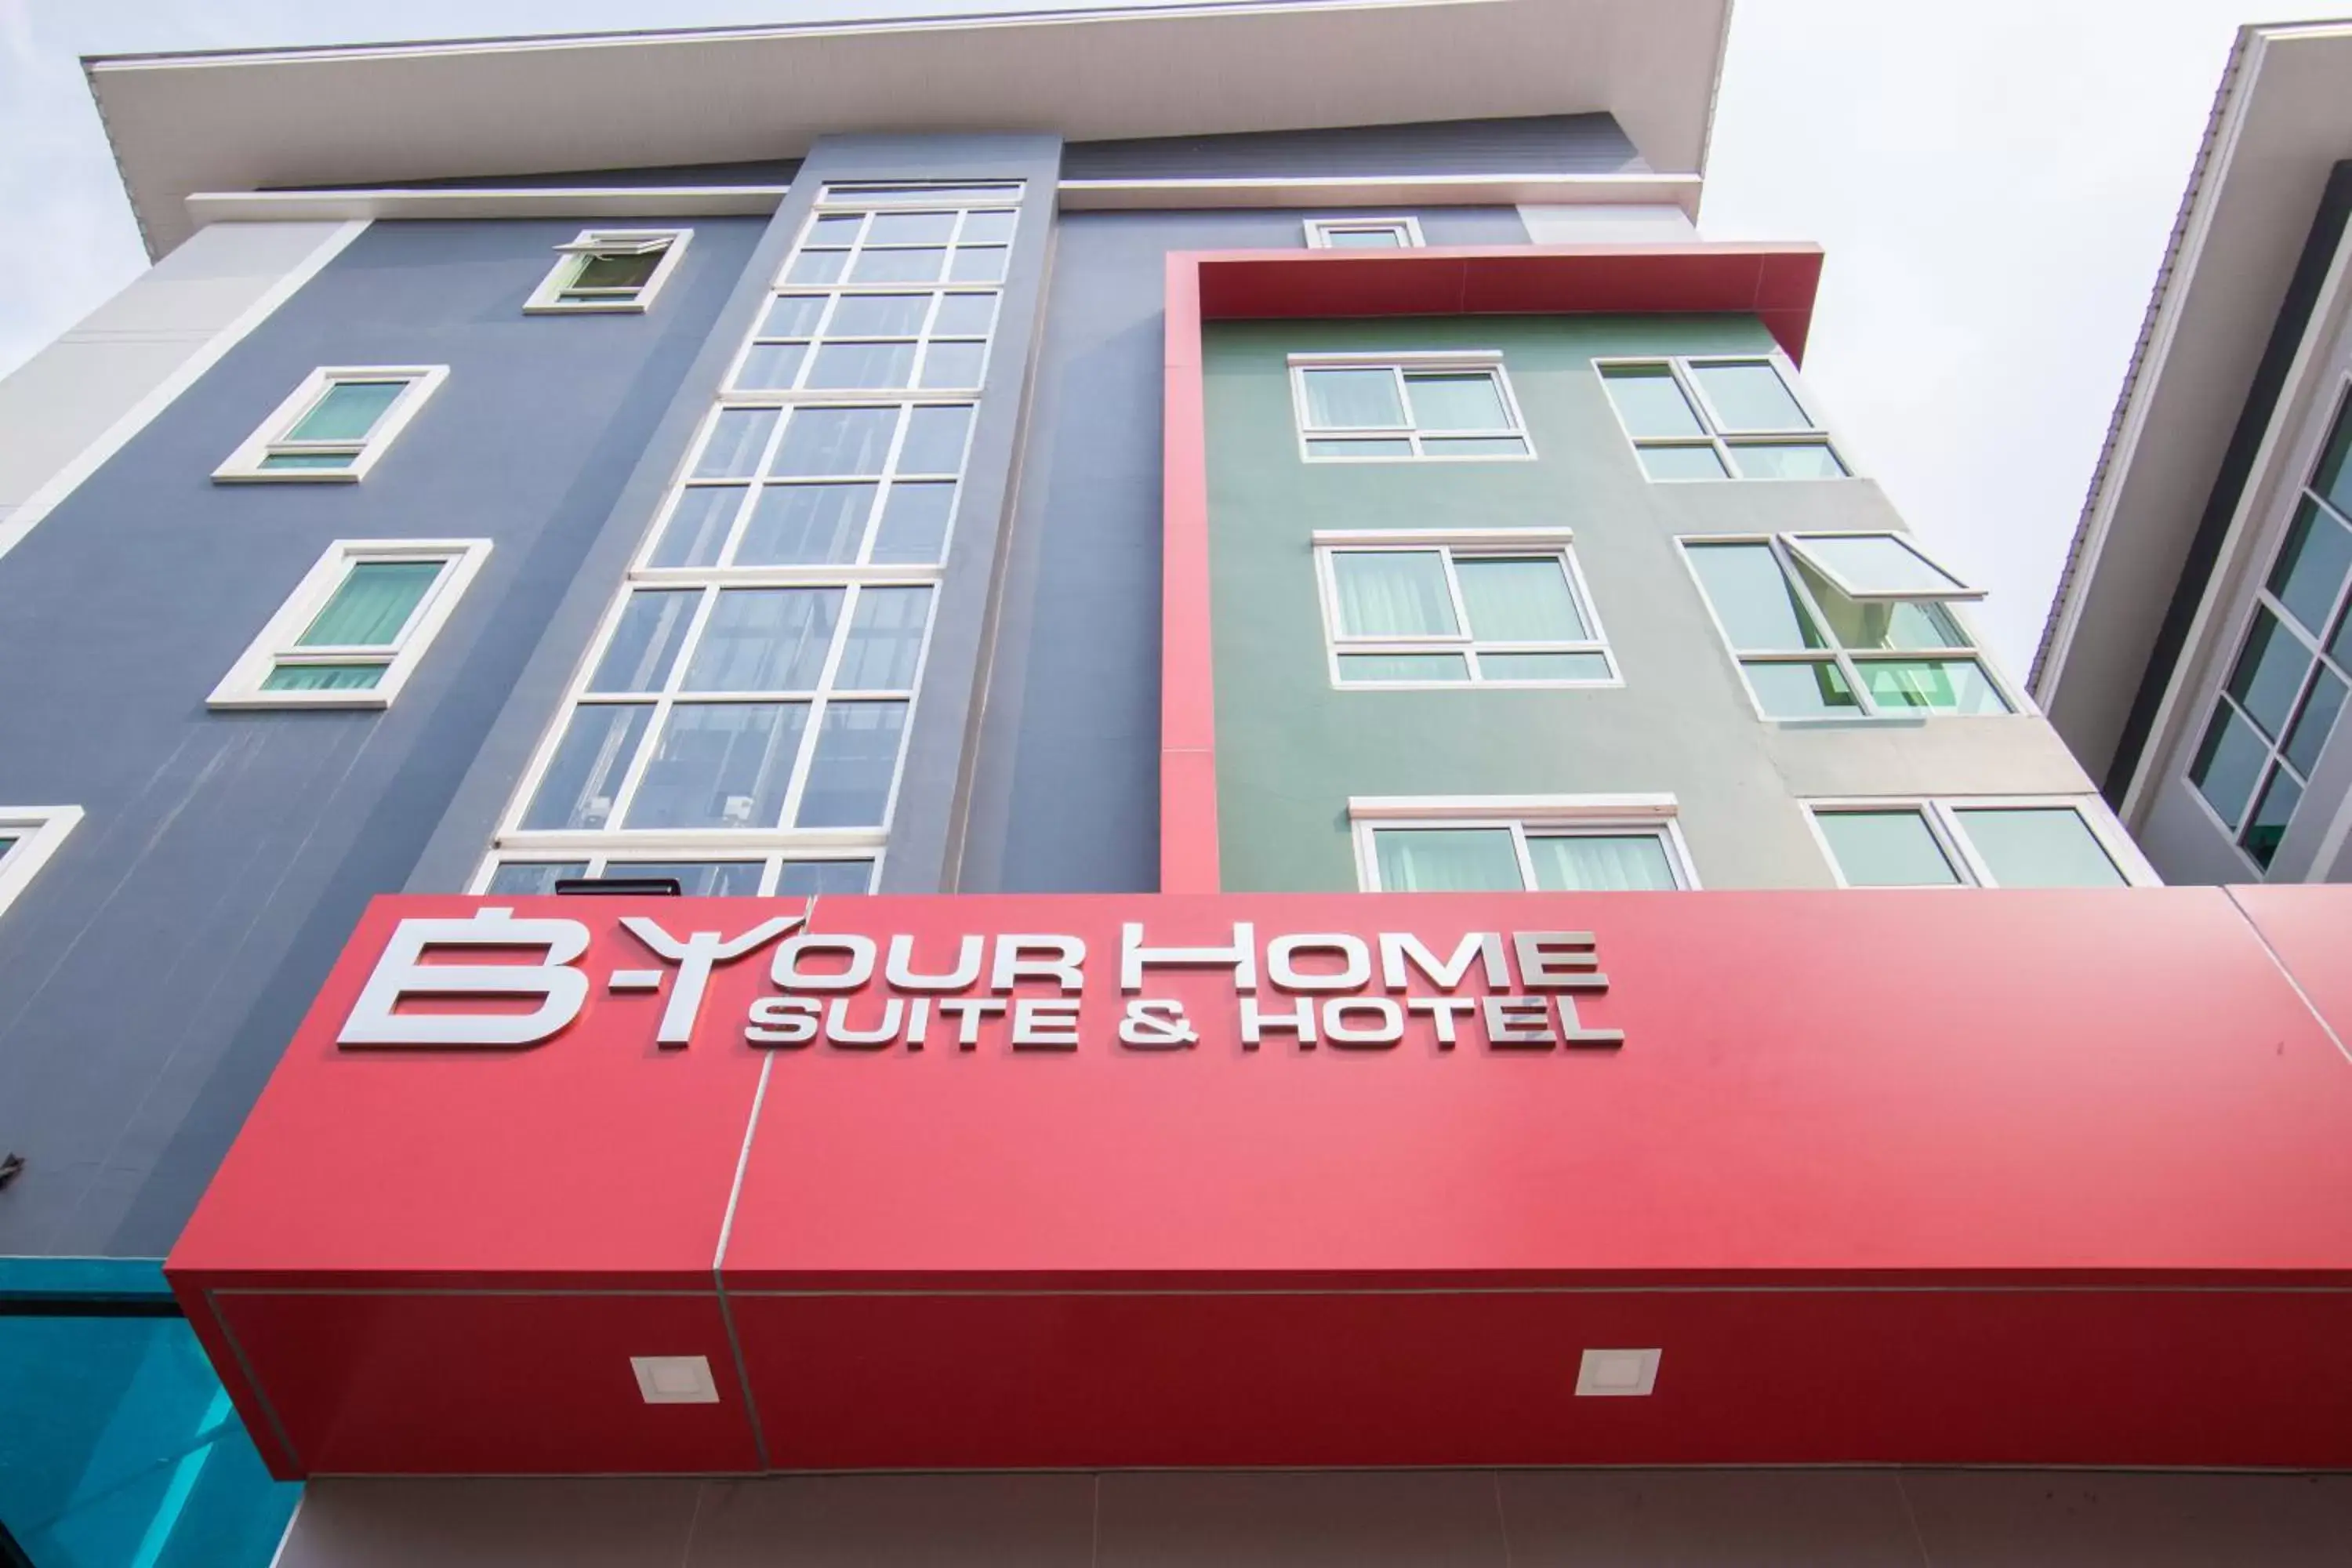 Property Building in B-your home Hotel Donmueang Airport Bangkok -SHA Certified SHA Plus